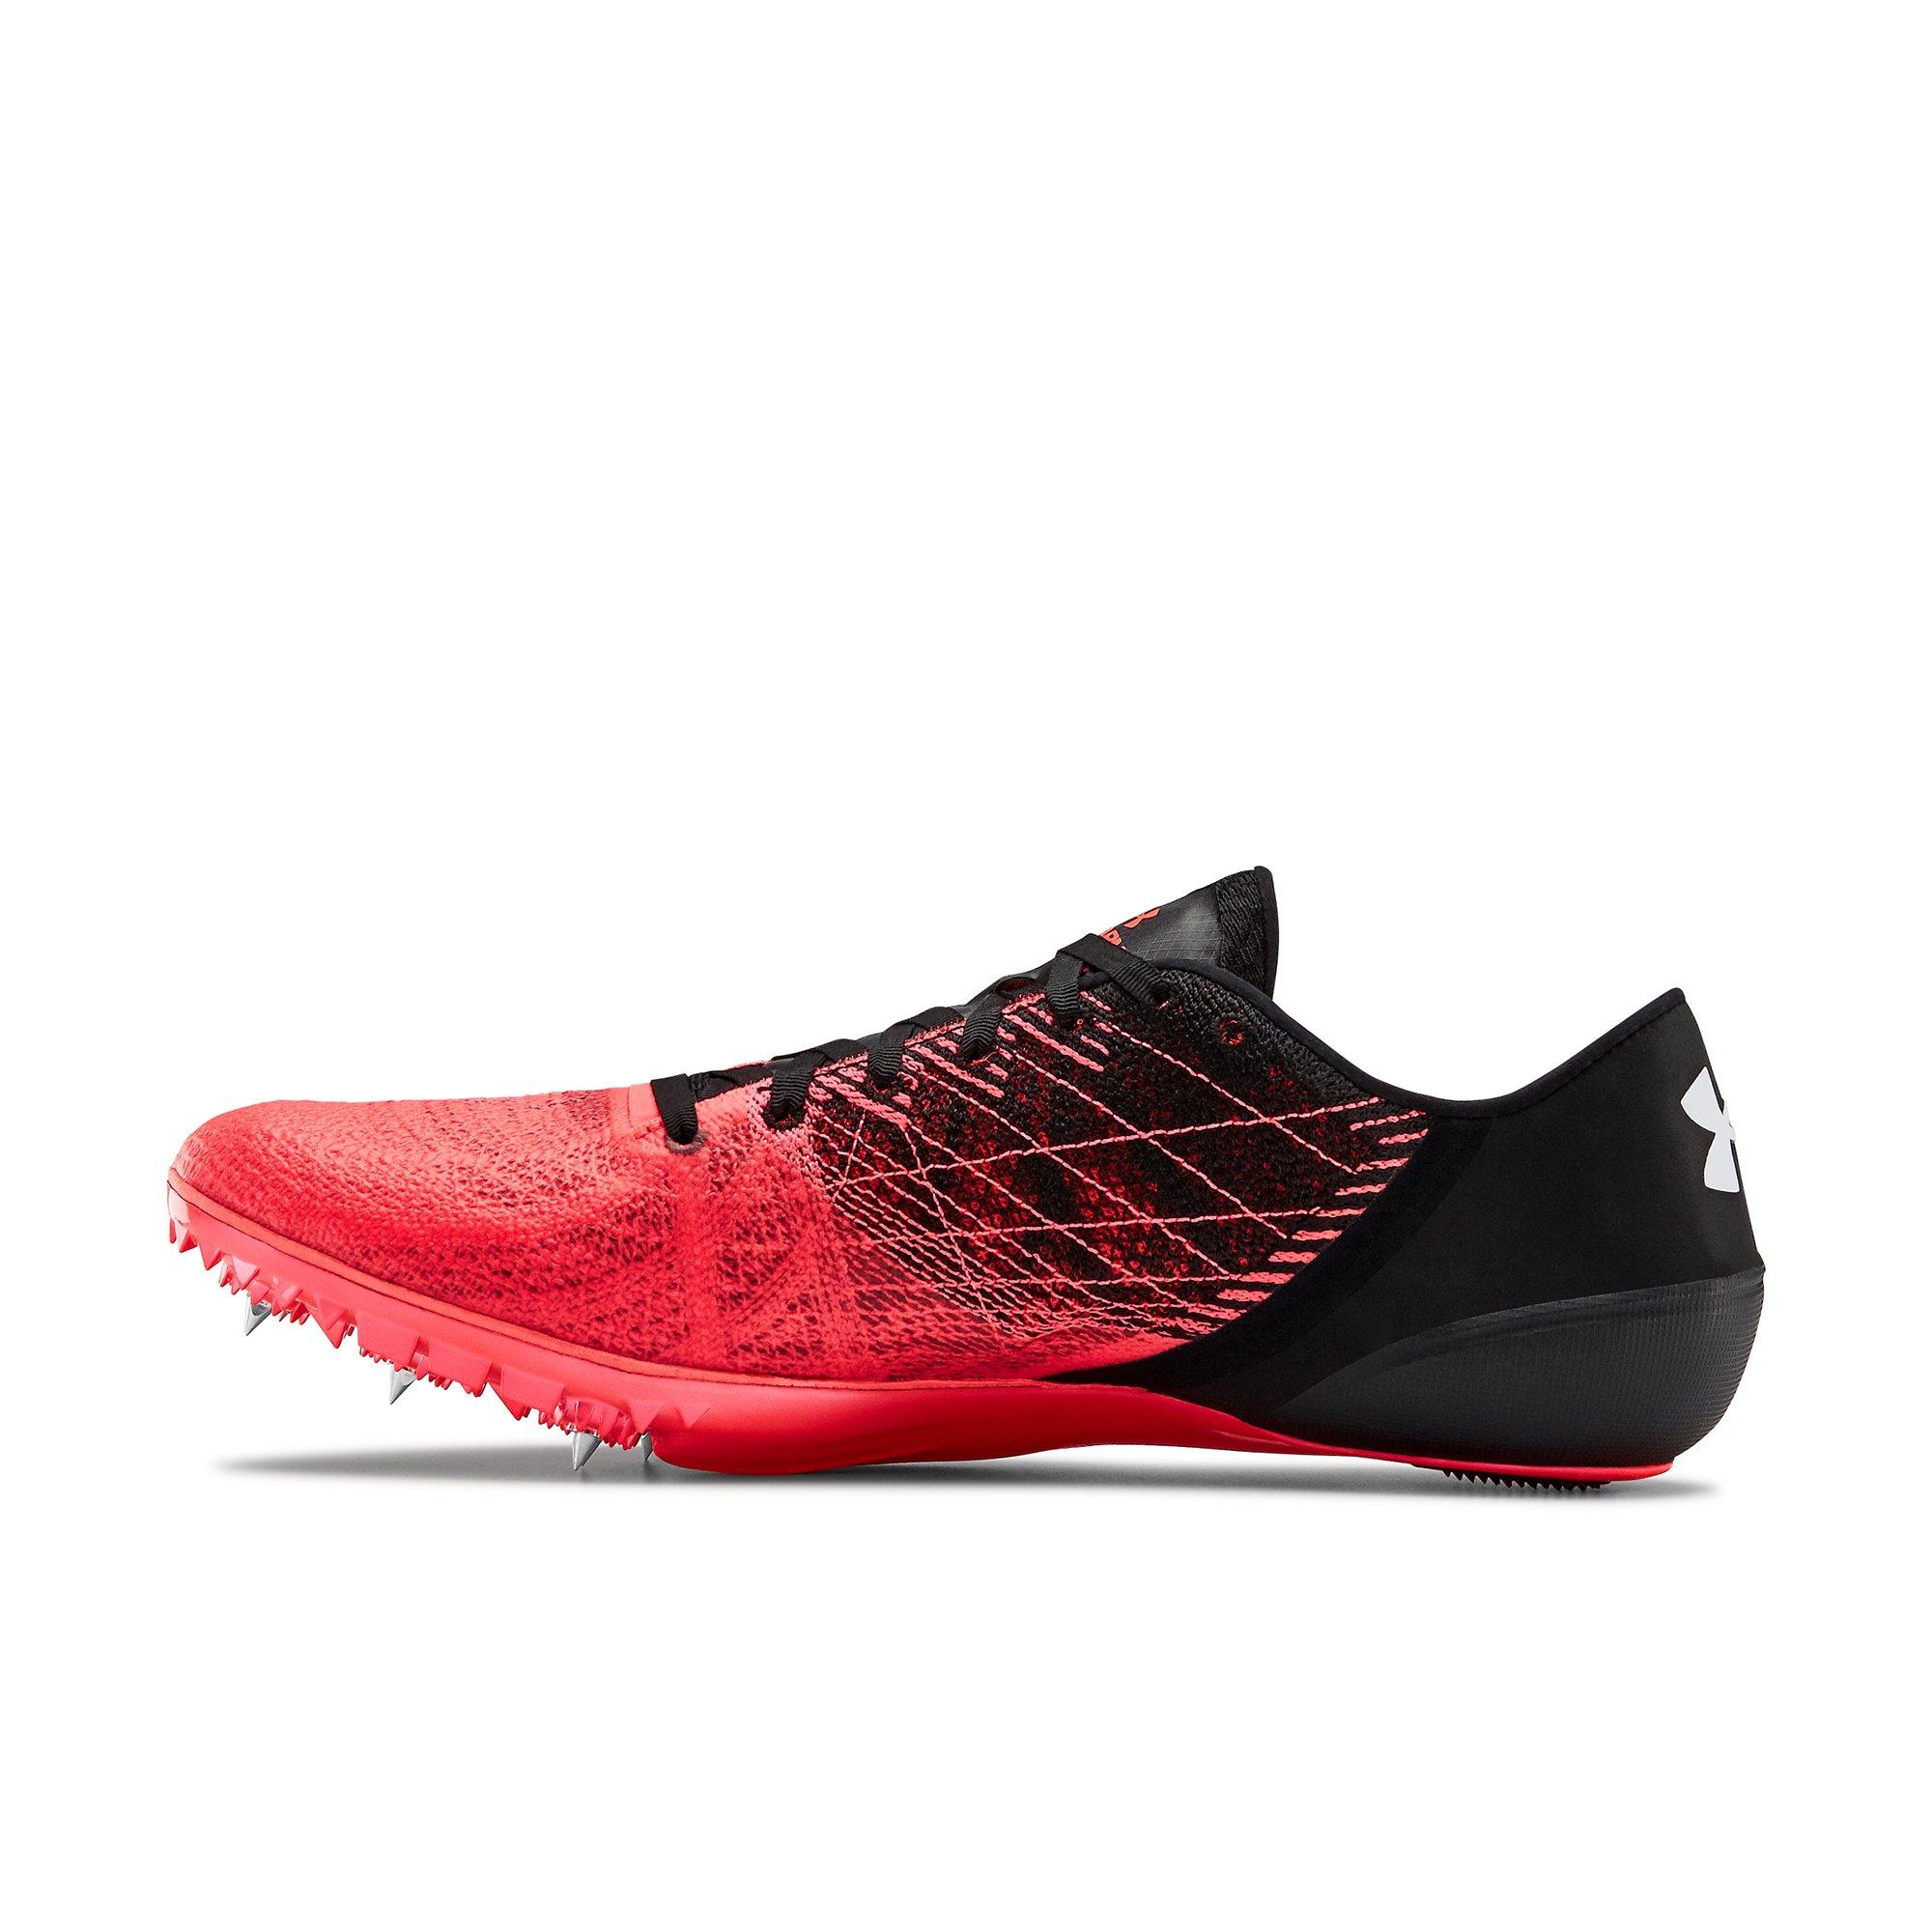 under armour men's speedform sprint 2 track and field shoes